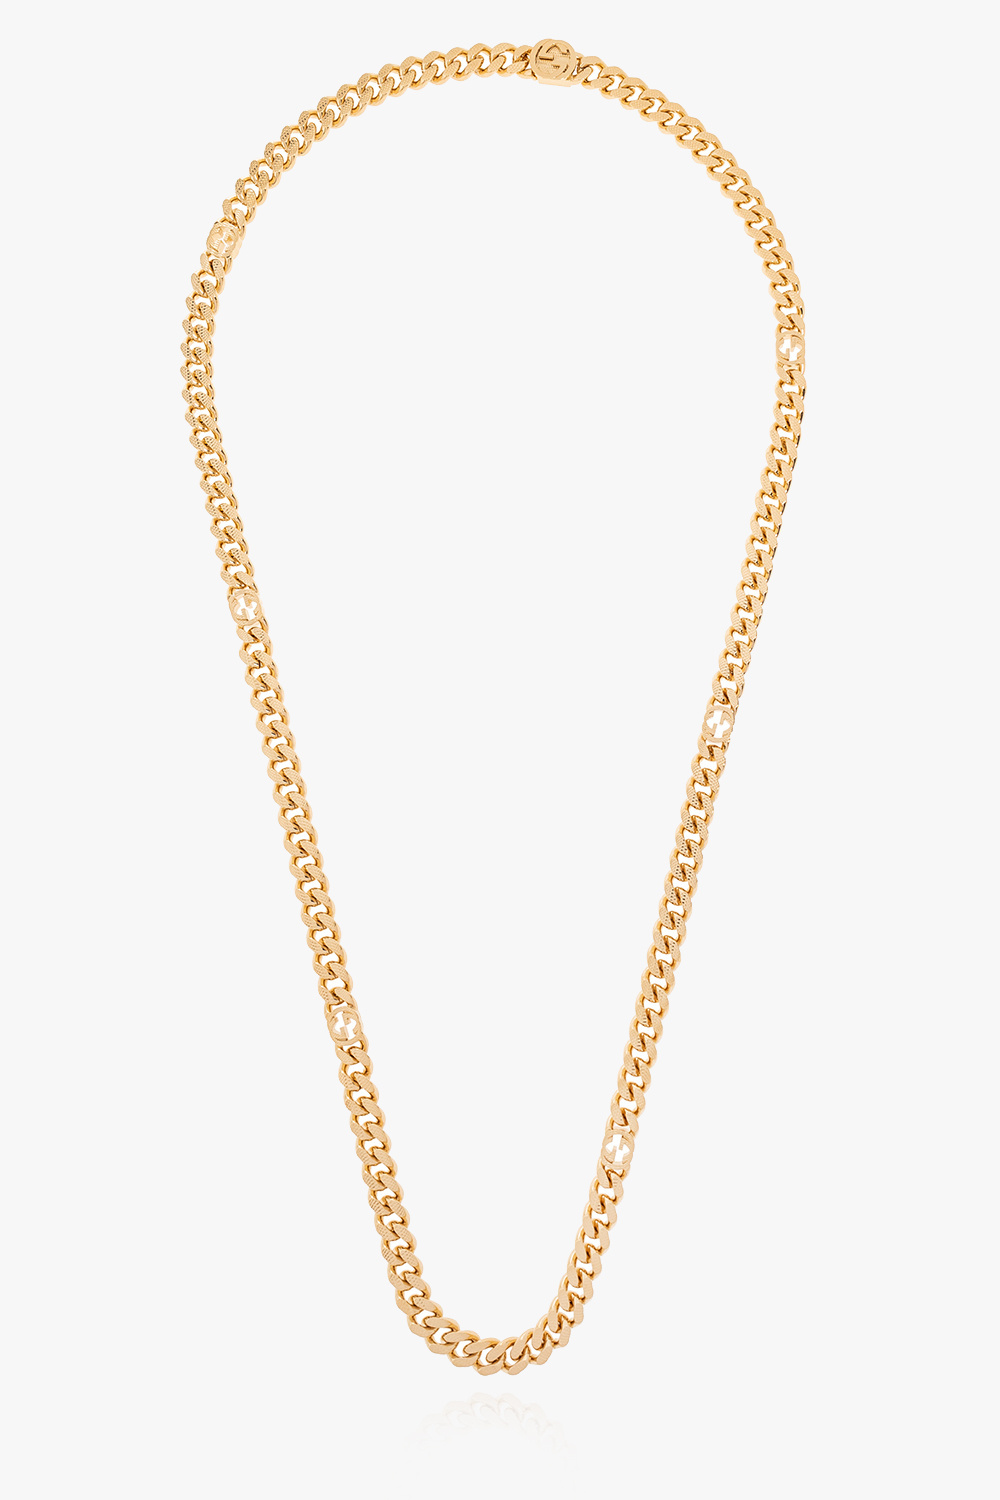 gucci Bag Brass necklace